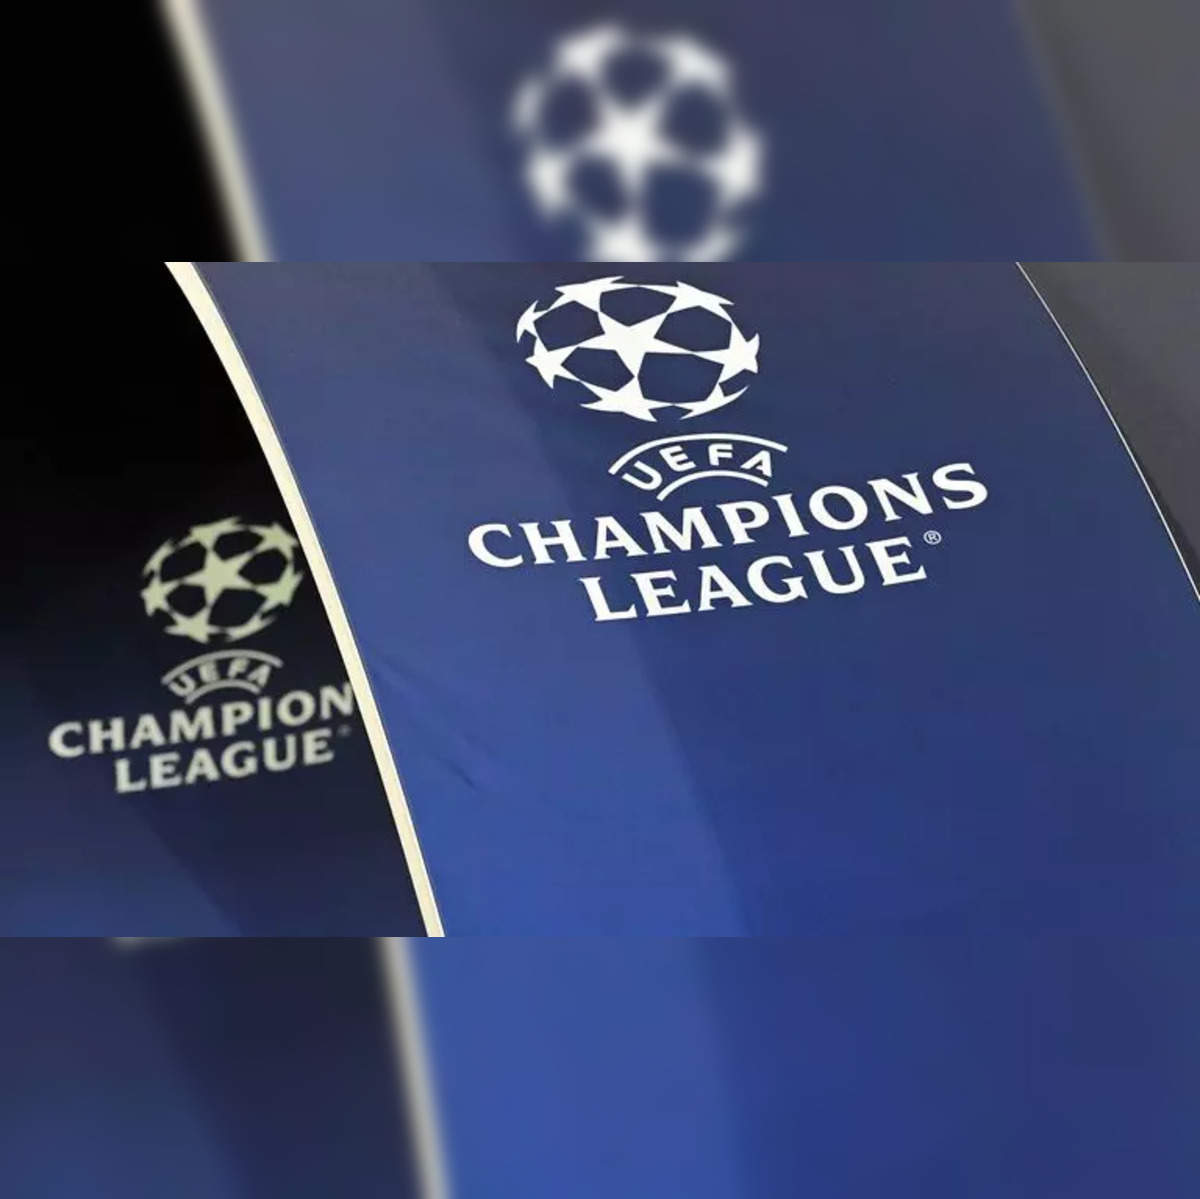 Champions League News - Latest News and Updates Today